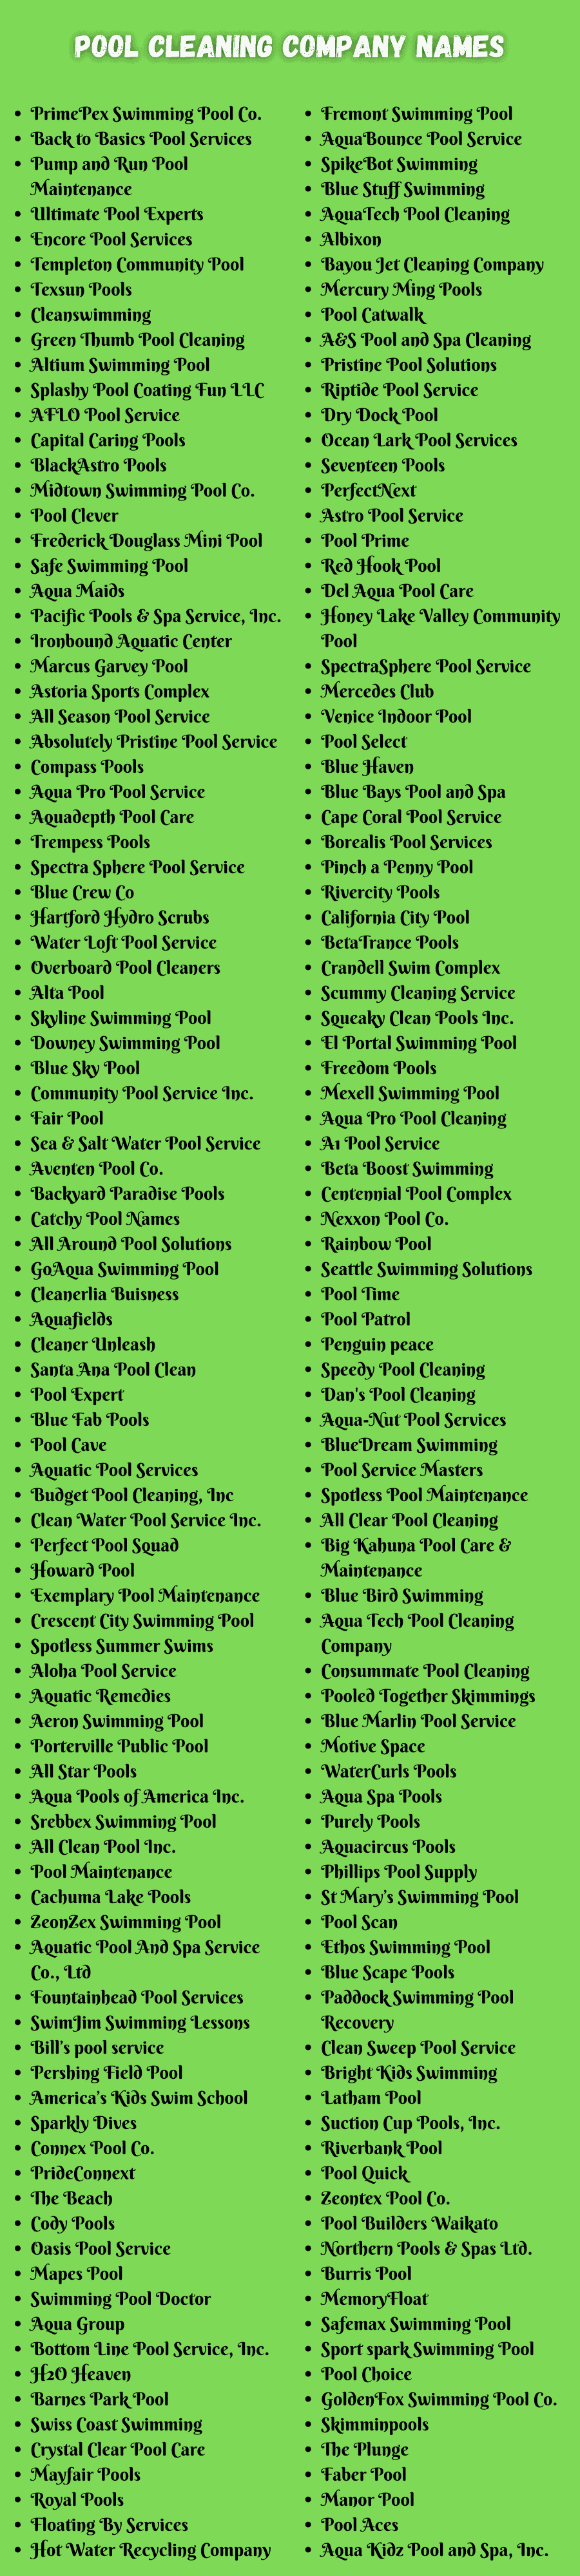 430 Pool Cleaning Company Names to Inspire You